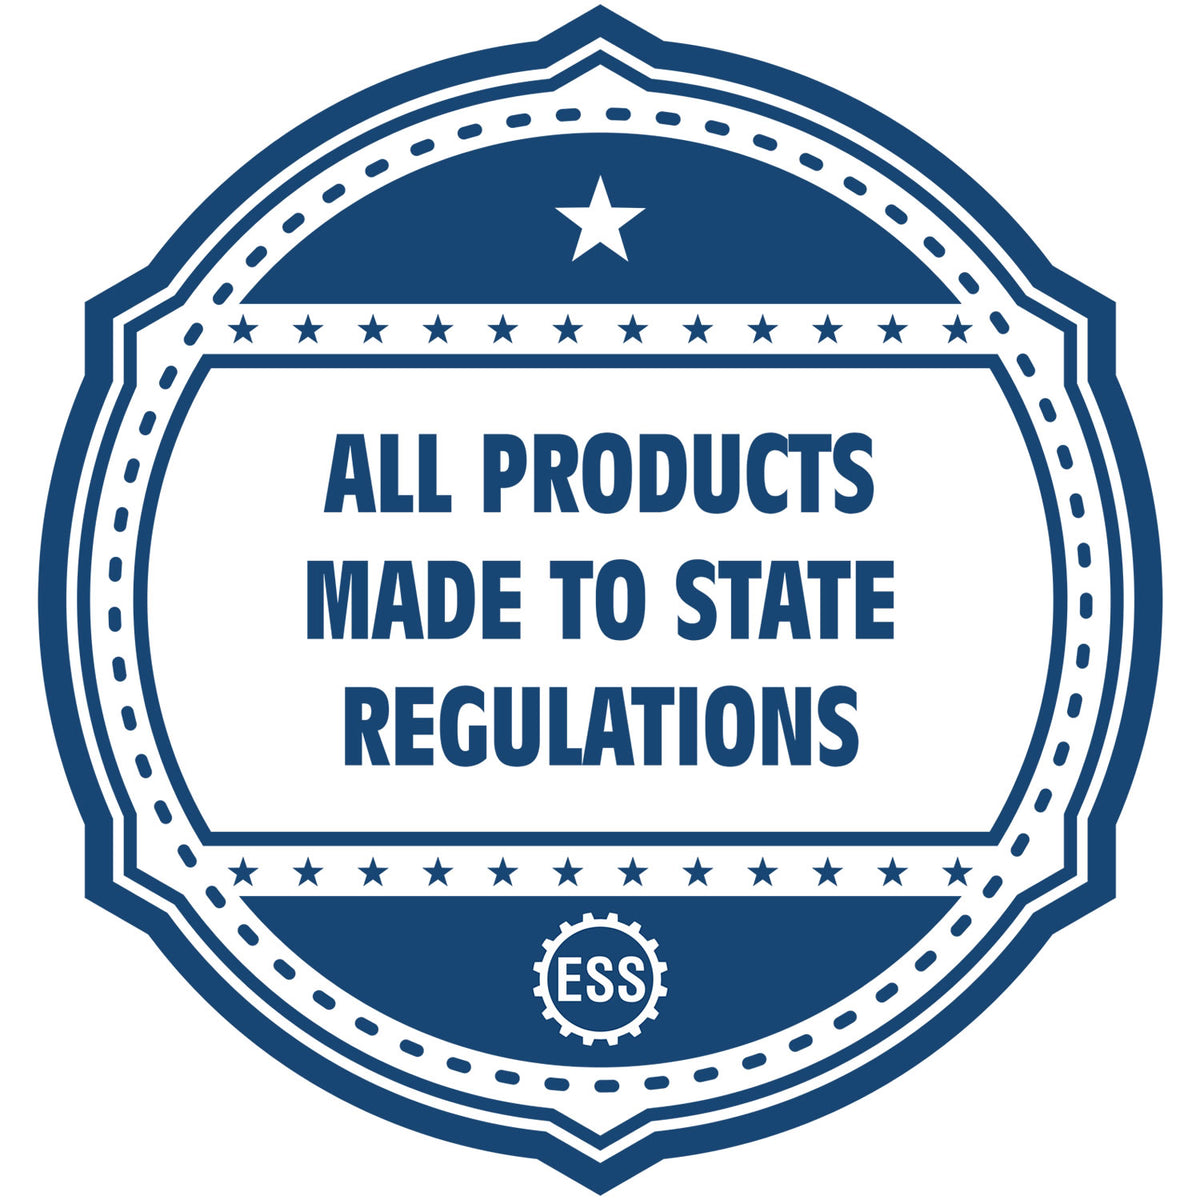 A blue icon or badge for the Gift Vermont Engineer Seal showing that this product is made in compliance with state regulations.